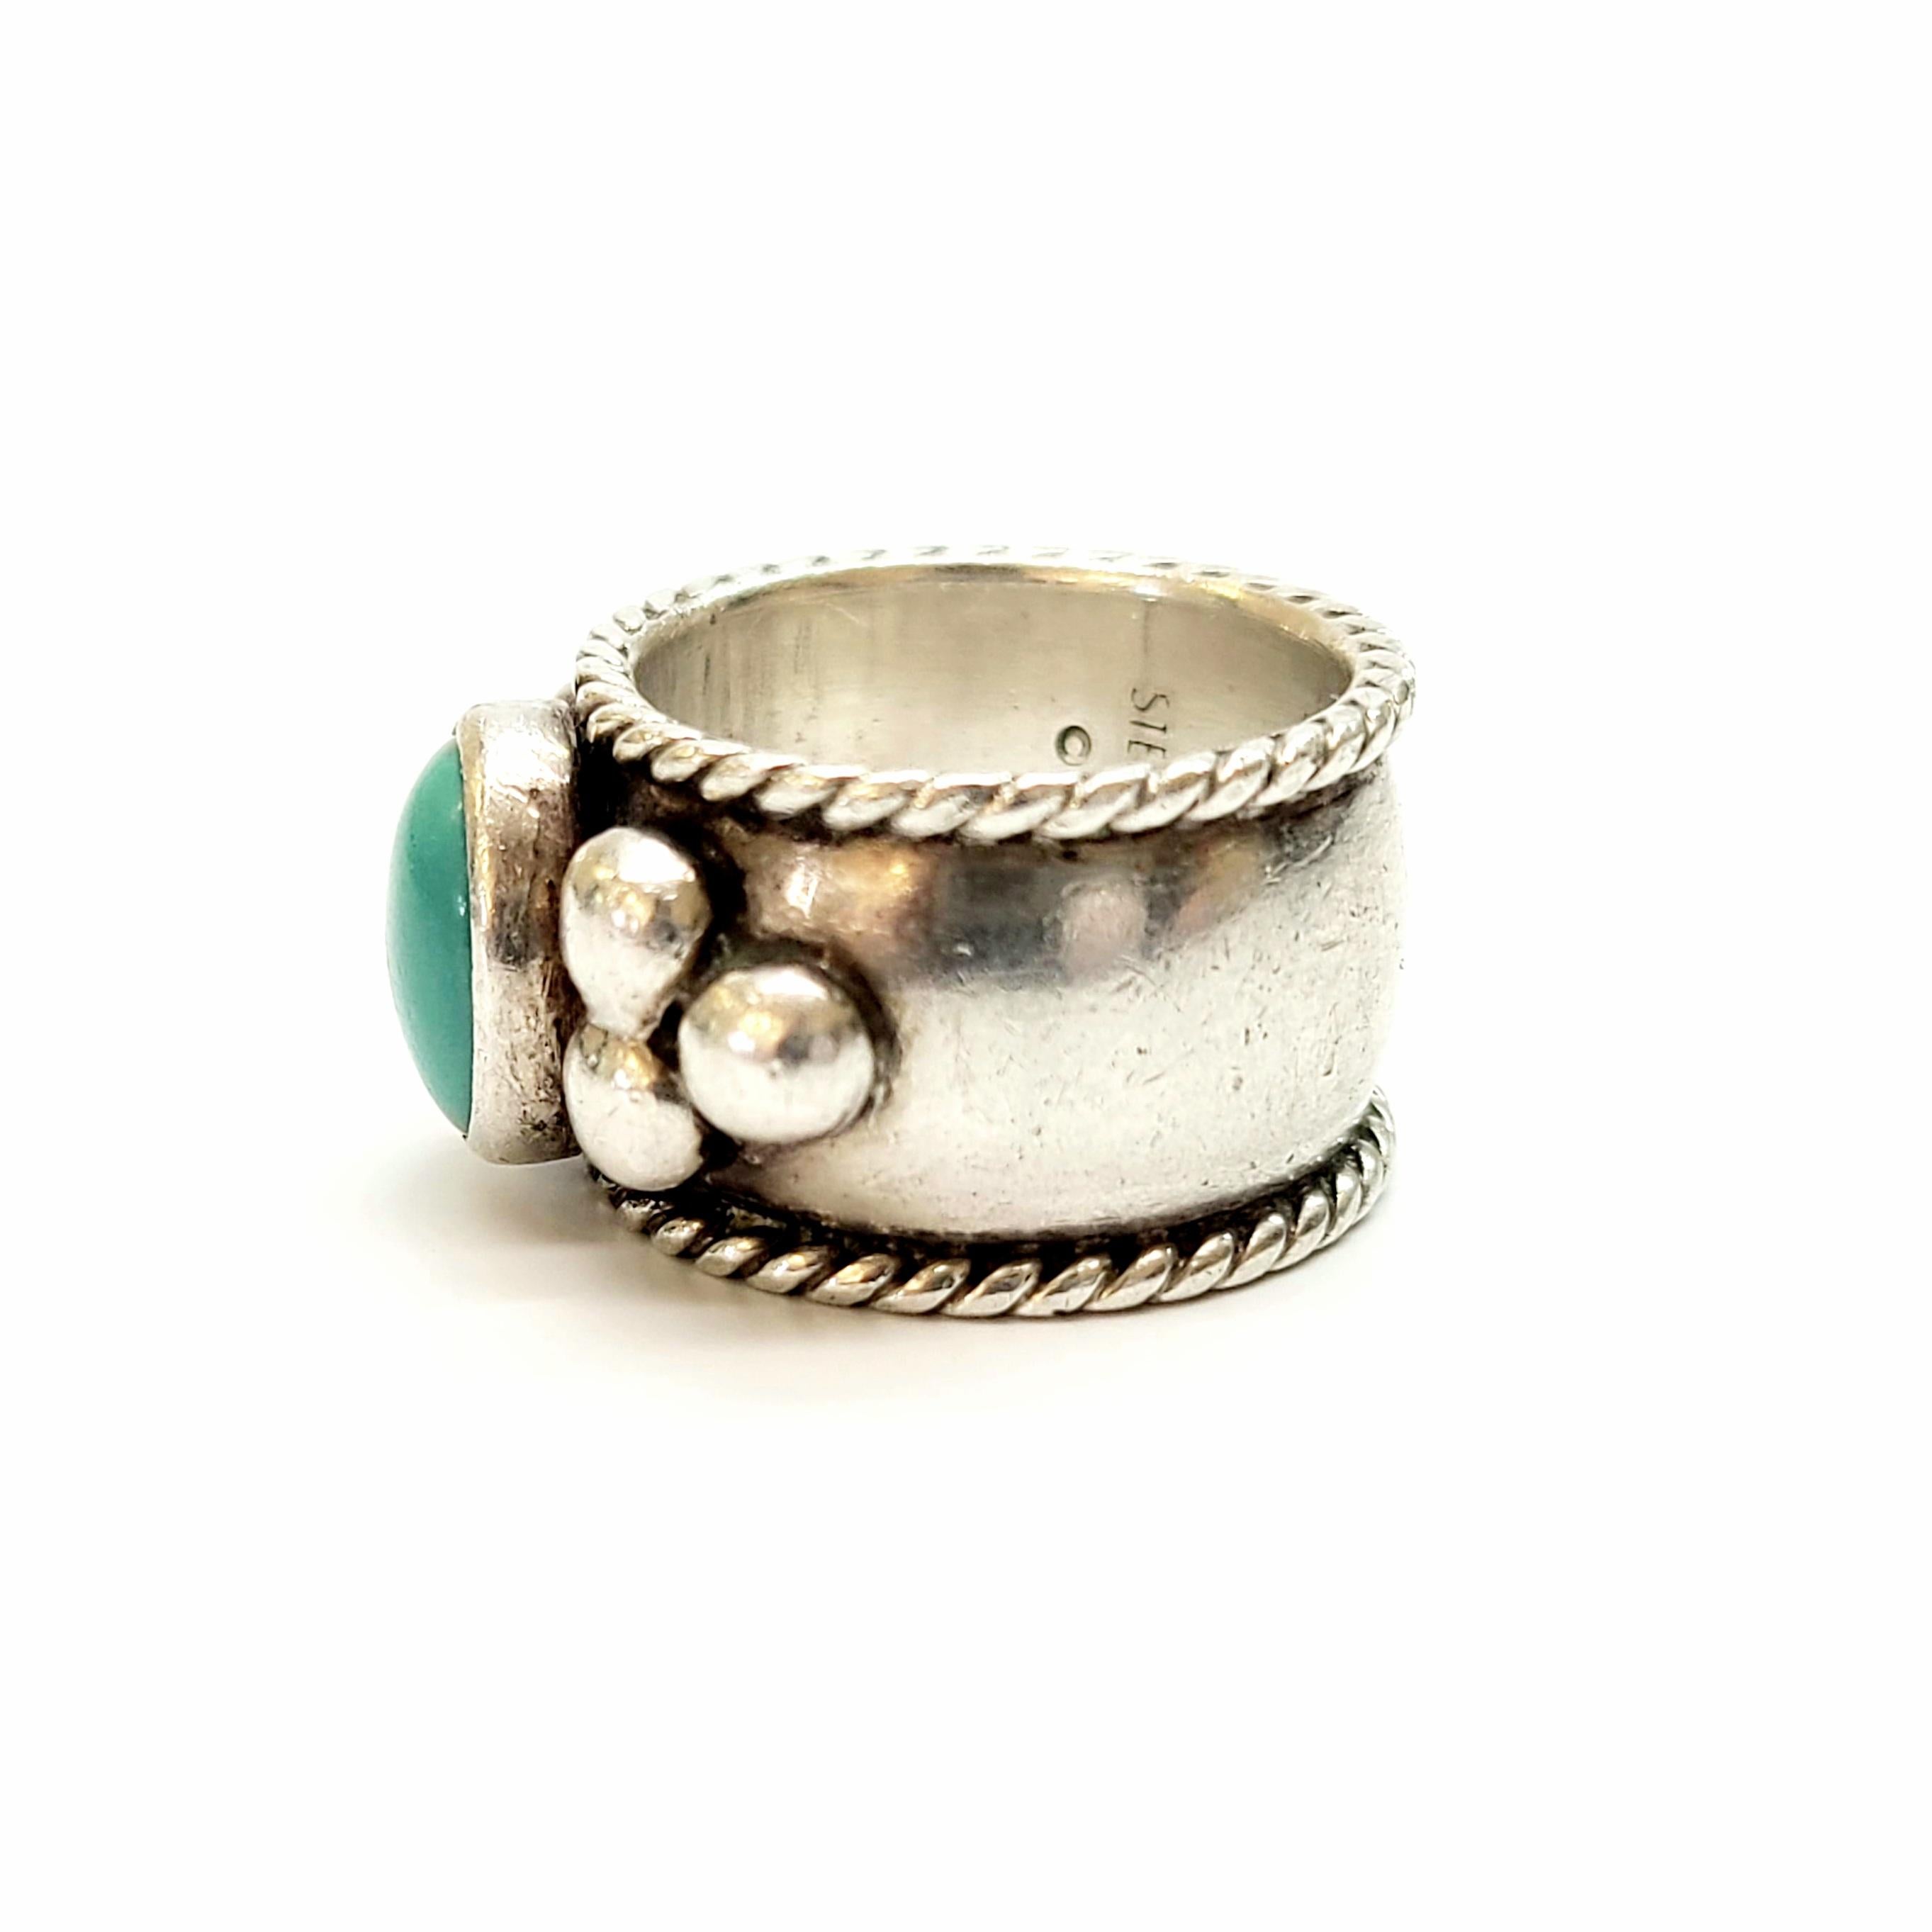 Sterling silver cigar band and turquoise ring by Santo Domingo Pueblo artisan, Sam Lovato.

Size 5

This piece features a bezel set oval turquoise stone, flanked on each side by a cluster of three silver beads, on a rope edged band.

Measures approx